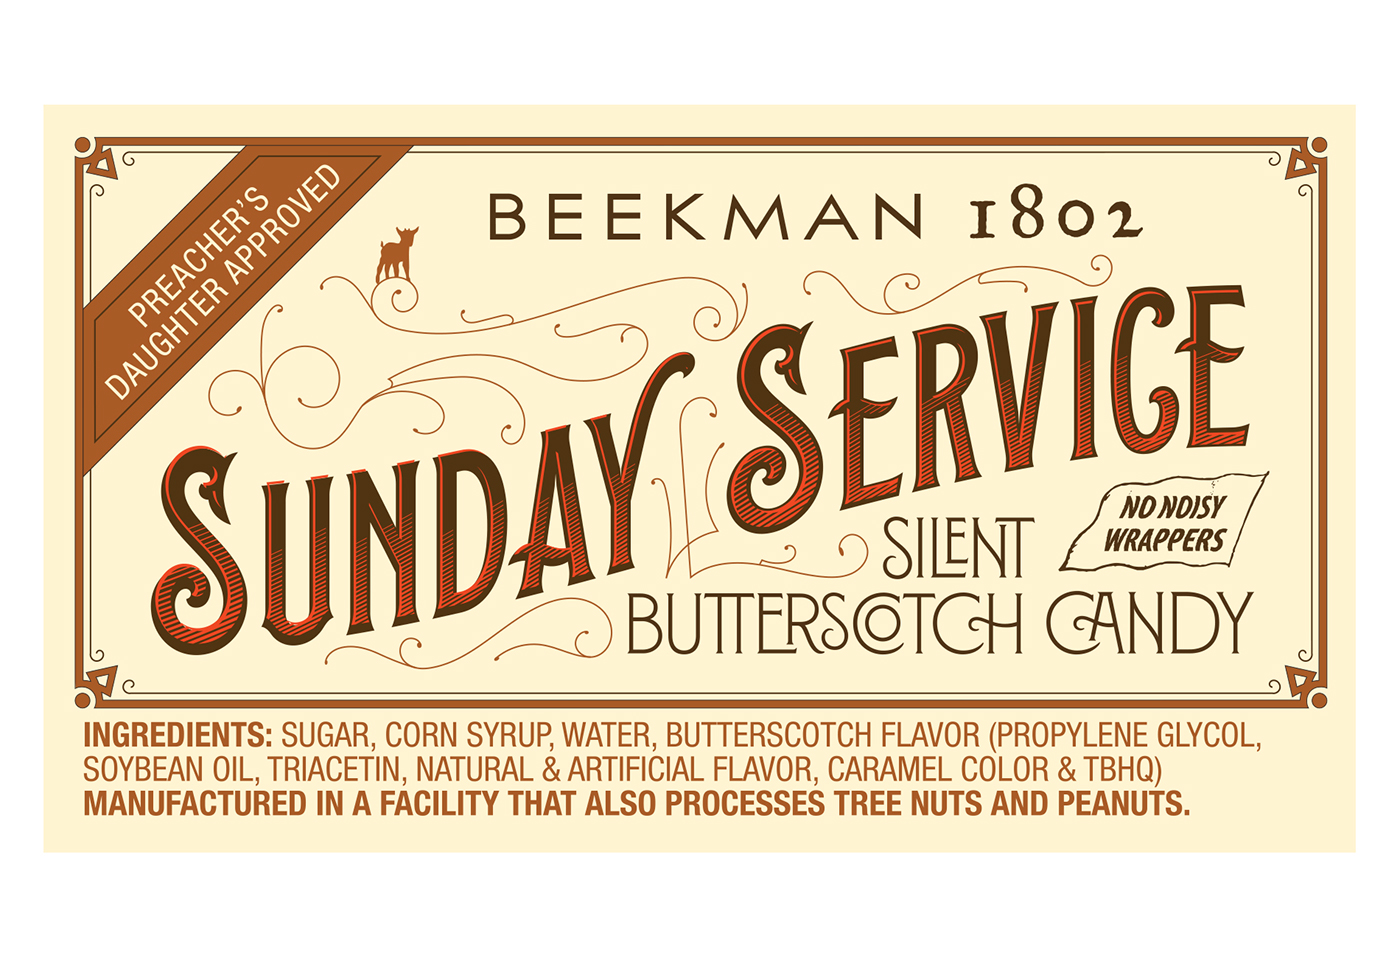 Packaging vintage lettering Retro Victorian Candy Beekman 1802 tin